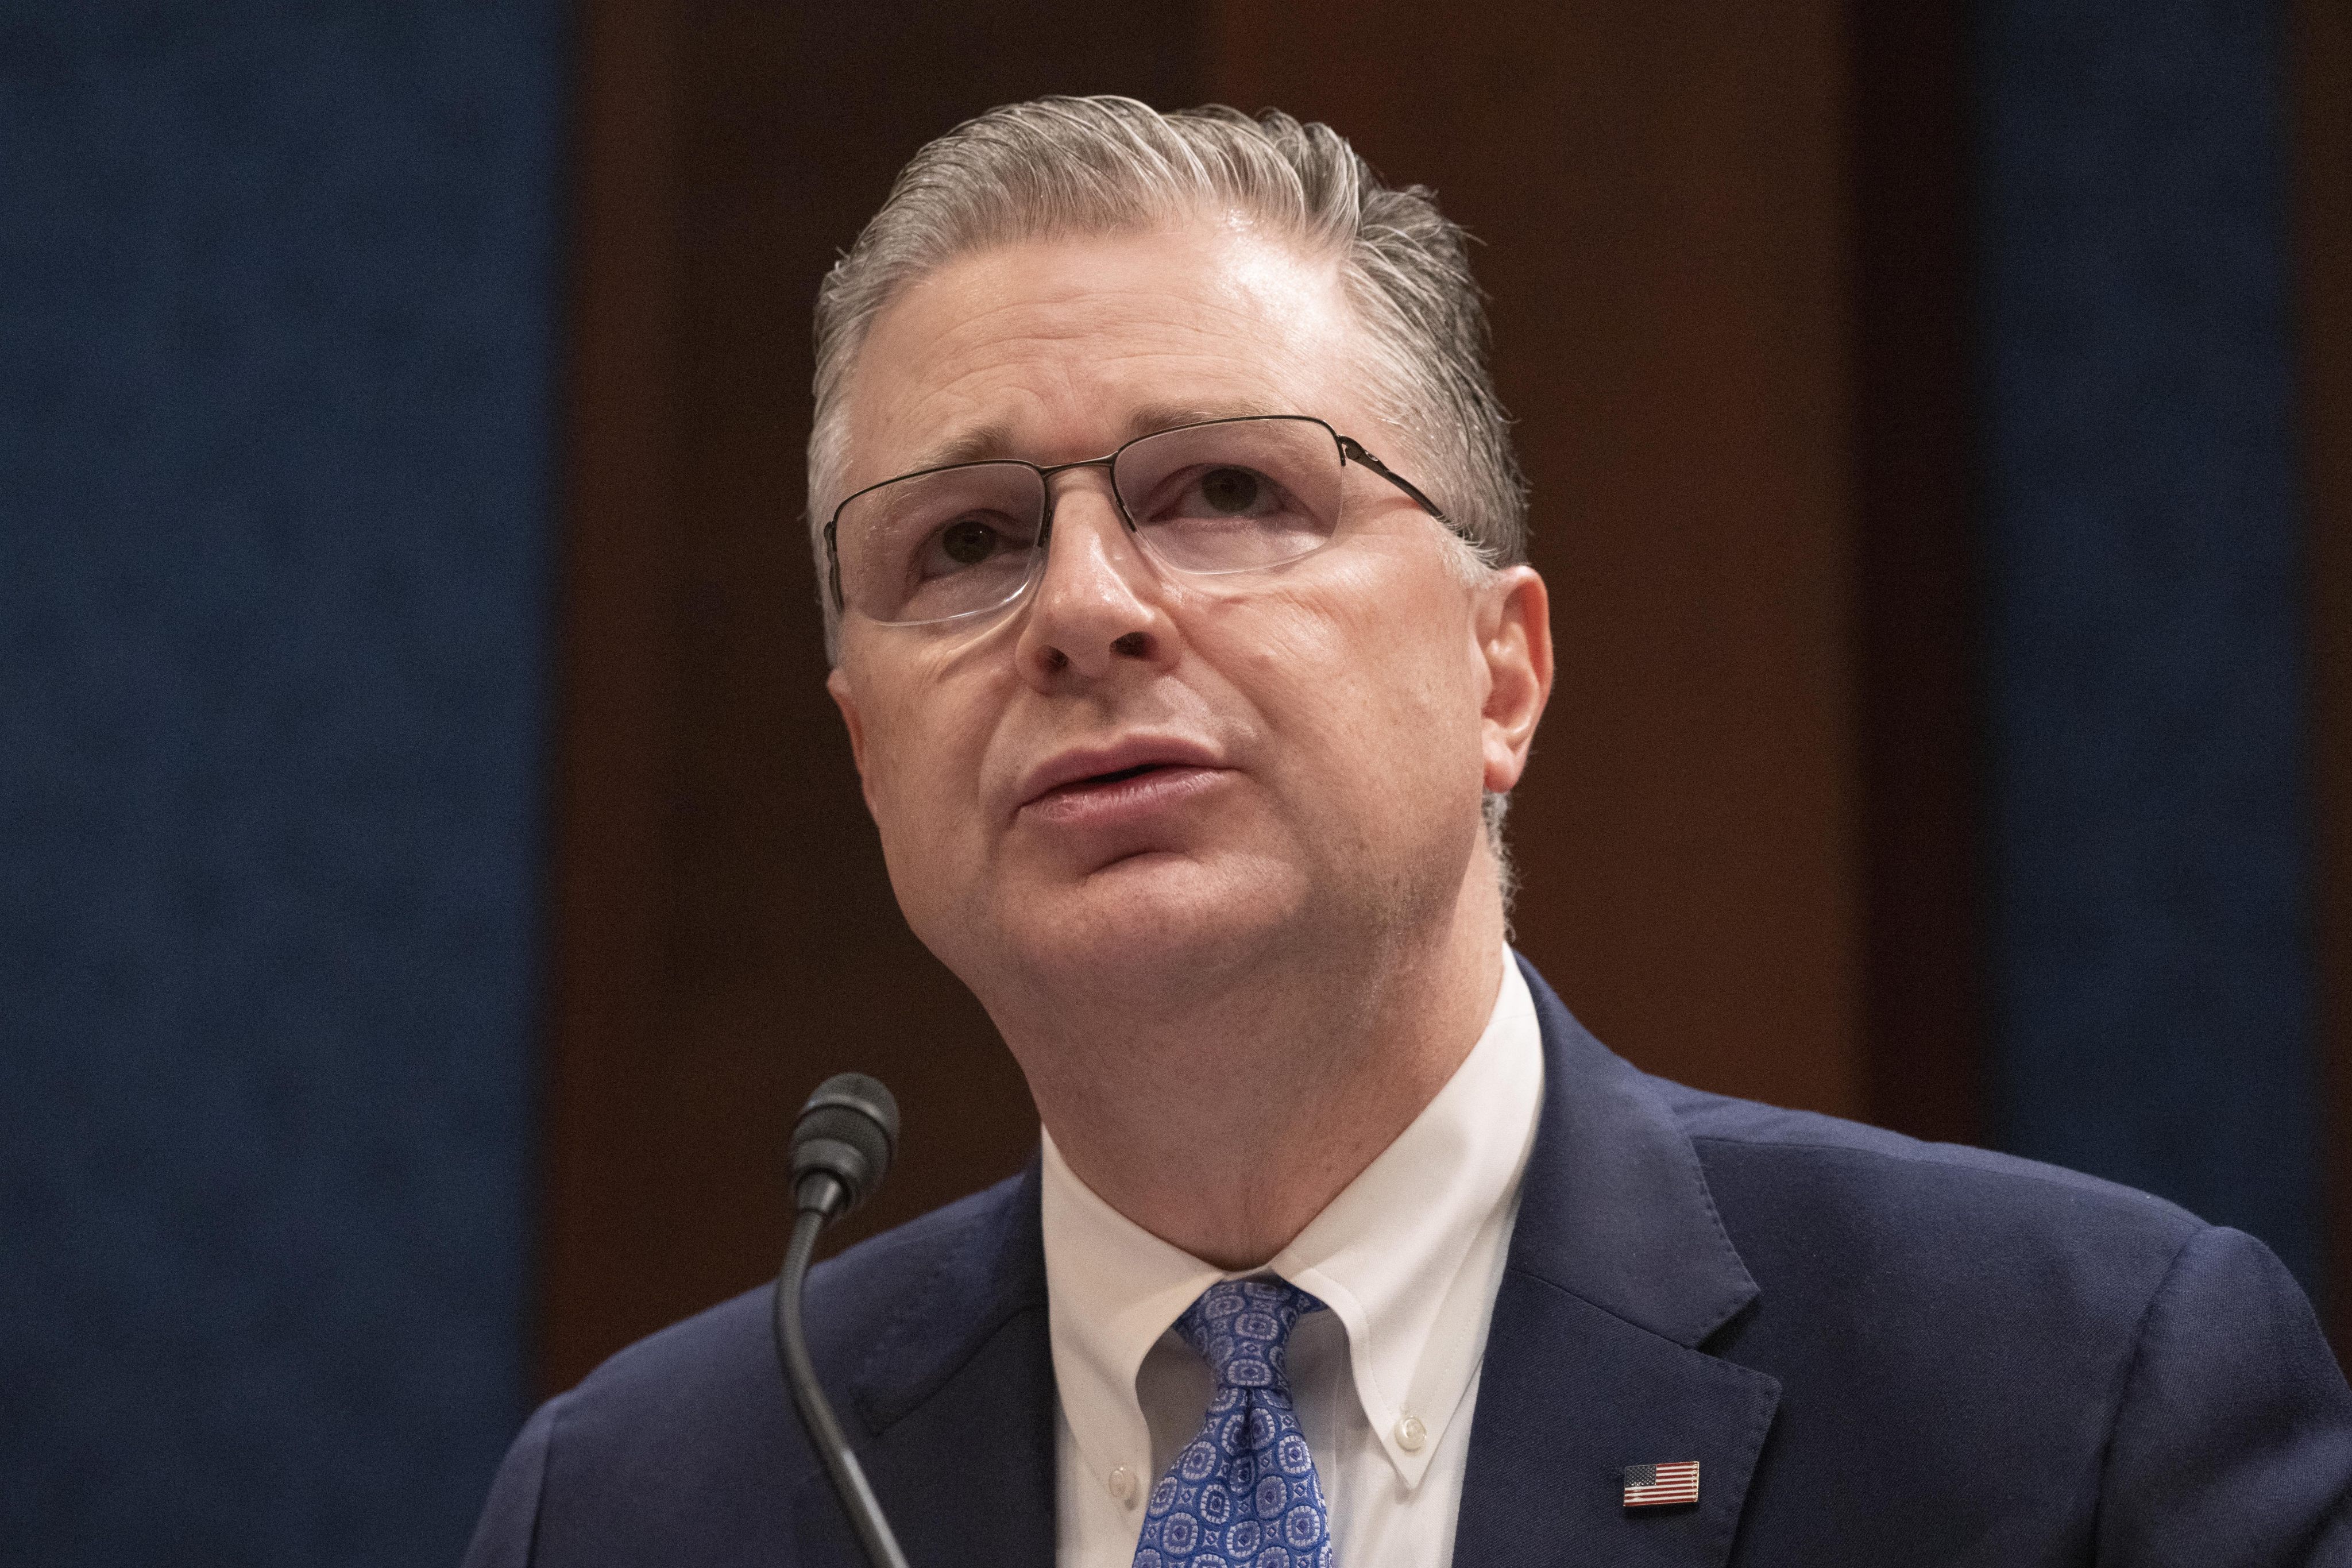 Assistant Secretary of State for East Asian and Pacific Affairs Daniel Kritenbrink is scheduled to visit China as part of ongoing efforts to reduce tensions between Washington and Beijing. Photo: AP